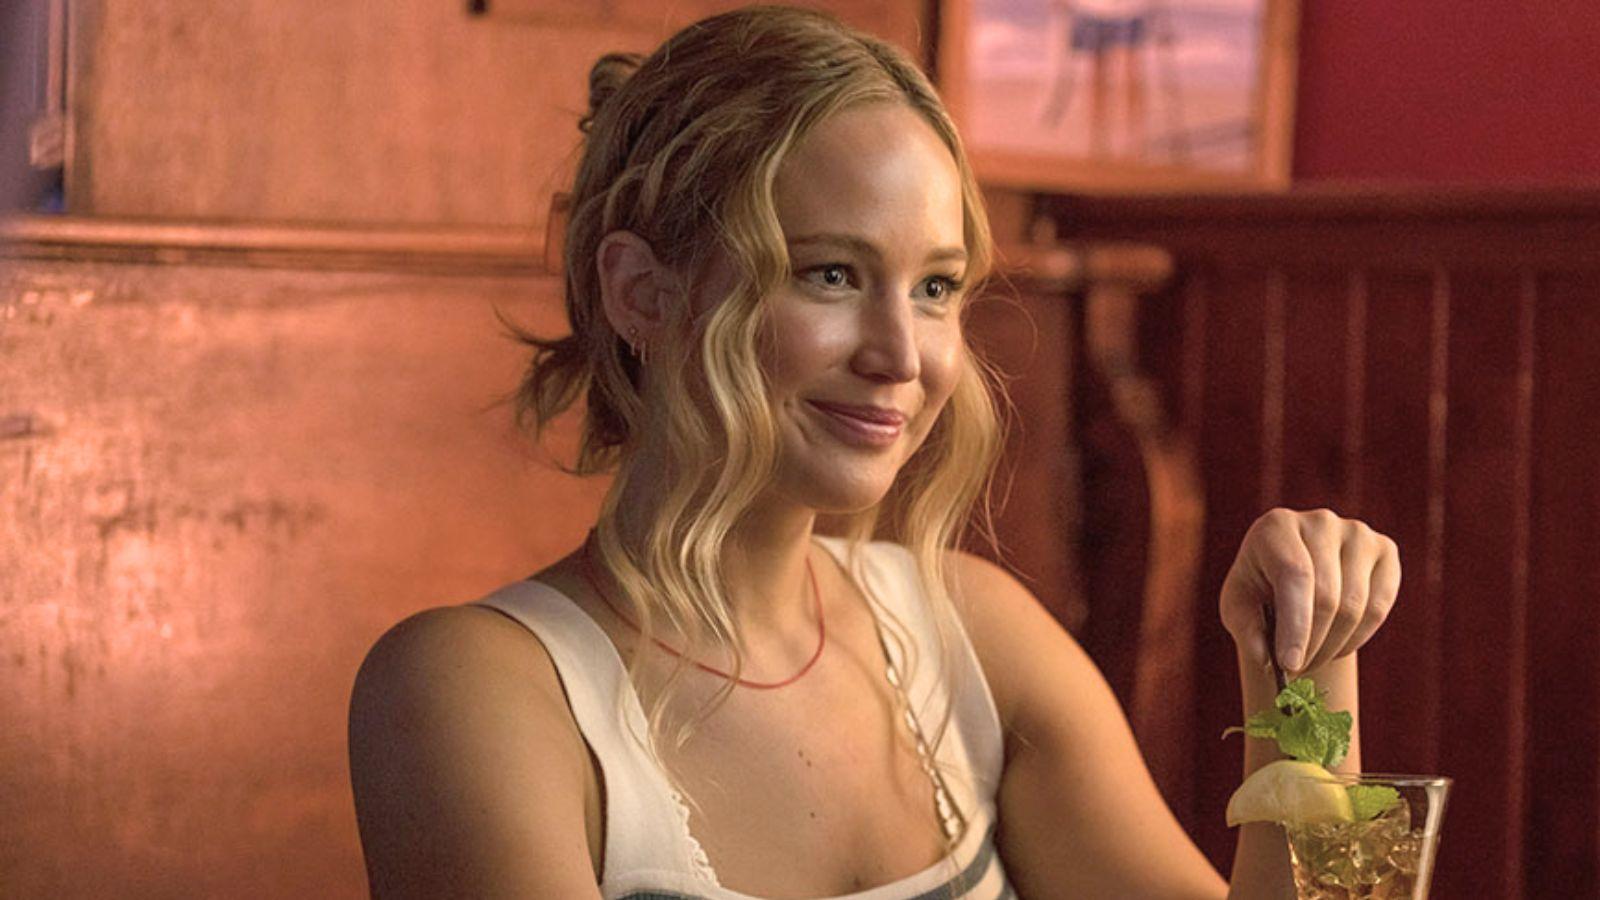 Jennifer Lawrence in No Hard Feelings. She sits at a table in a bar stirring her drink.